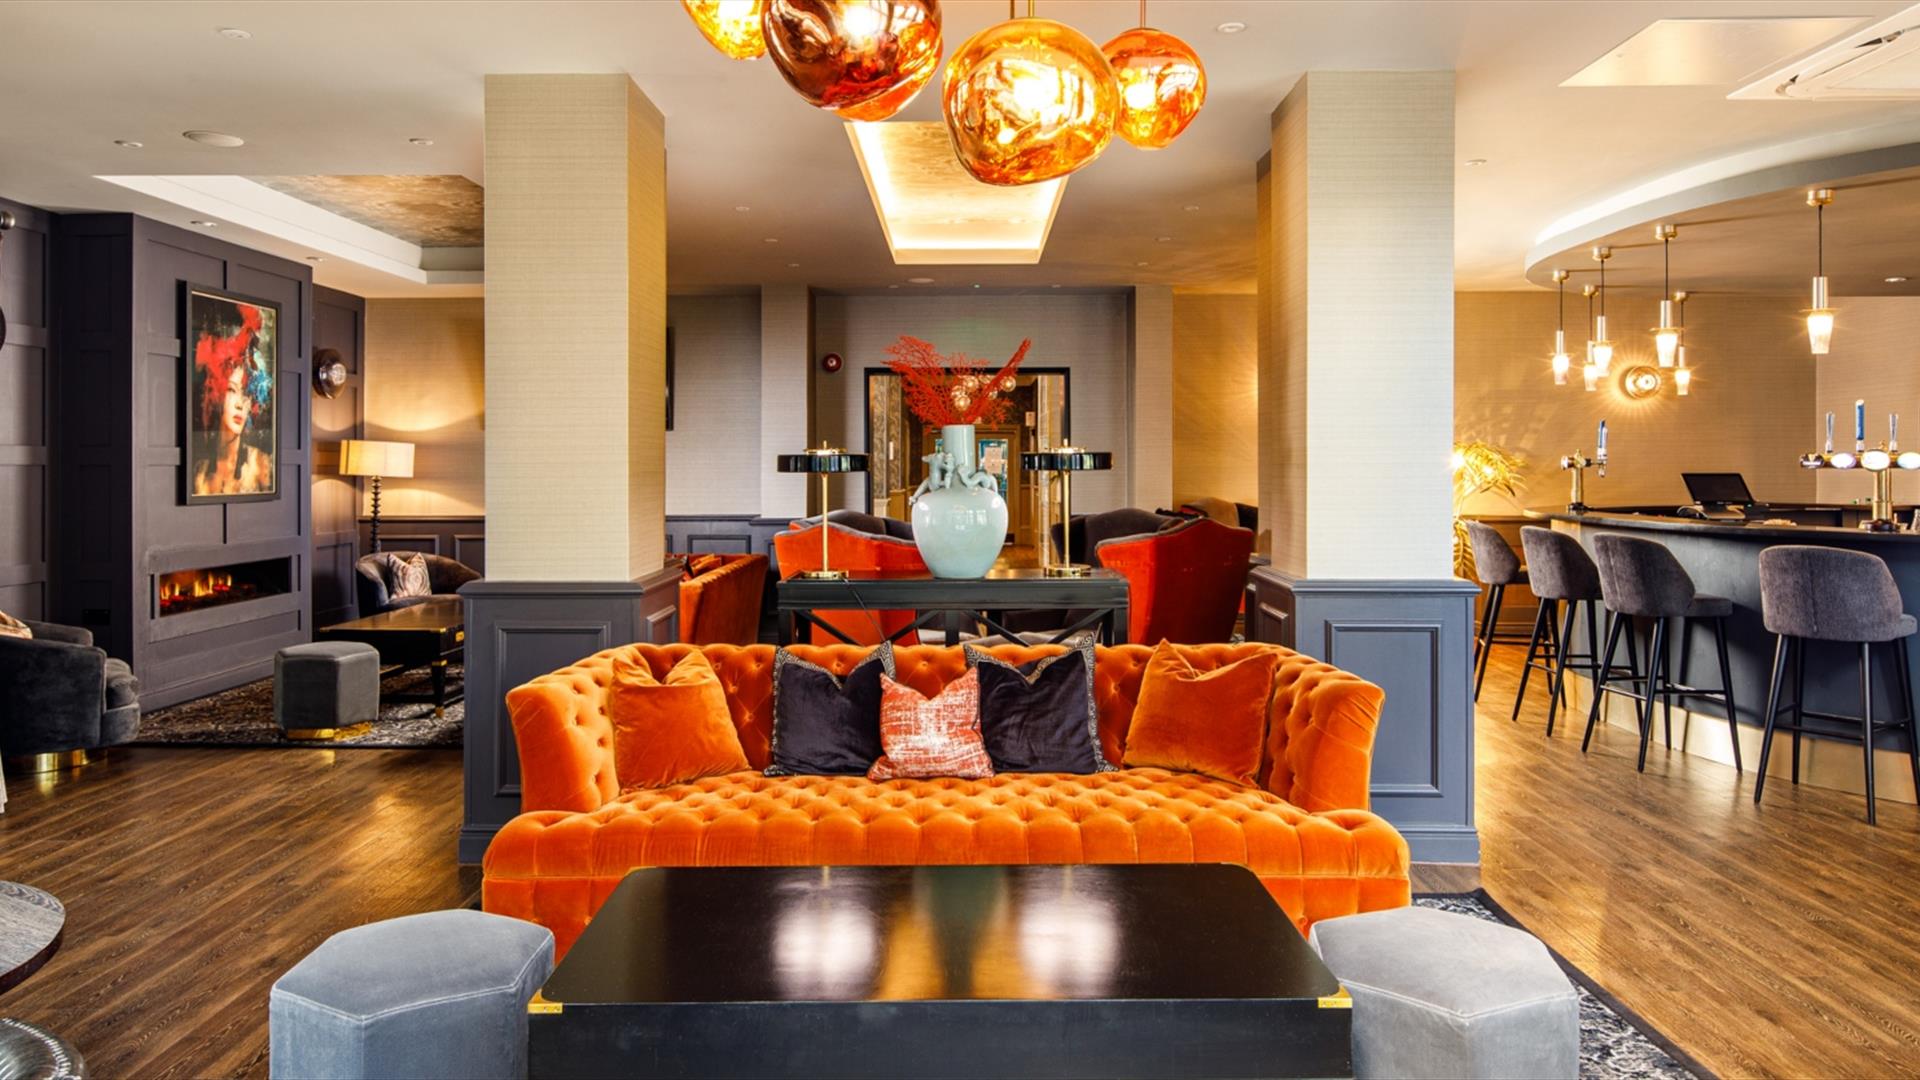 Inside a hotel bar area with colourful decor throughout